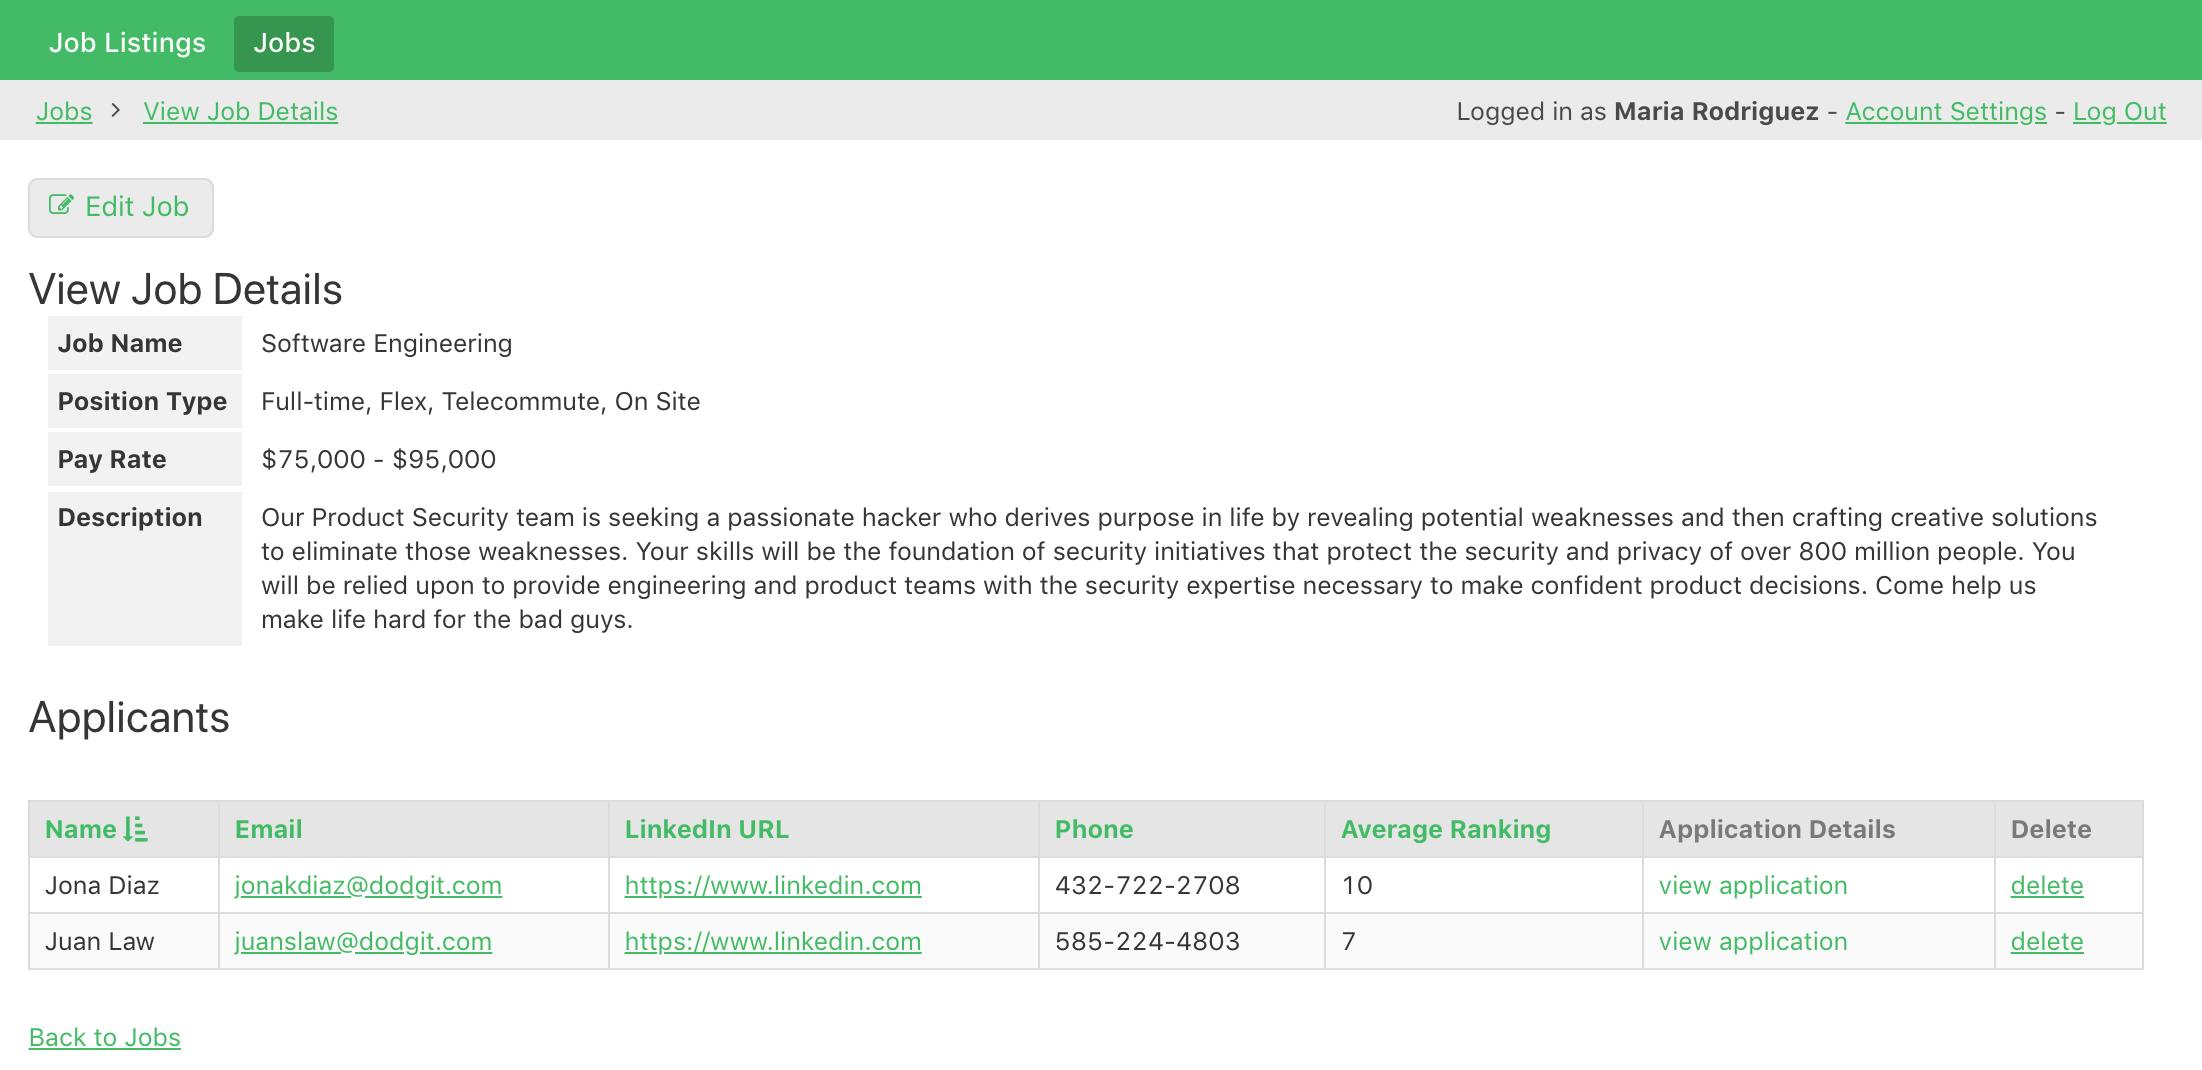 HR staff can view job listing details and applications.